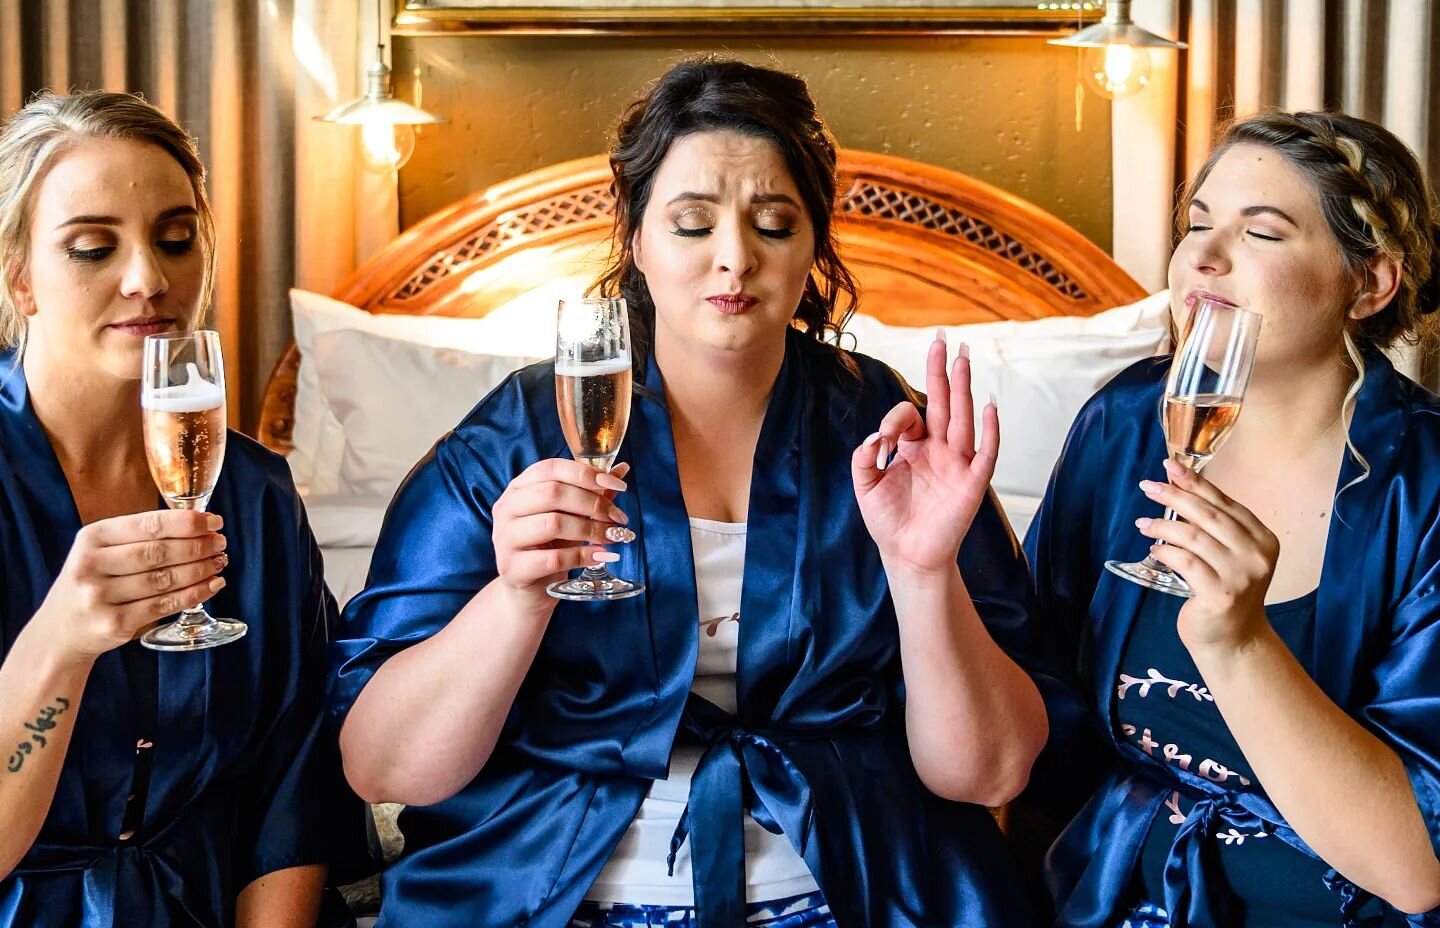 When the champagne is so good you can't help but pull a face...
.
.
#weddingphotographer #trouwfotograaf #trouwfotografie #bruidsfotograaf #bruiloftfotograaf #dutchphotographer  #bruidsfotograafzuidholland #bruidsfotograafzeeland #nederlandfotograaf 